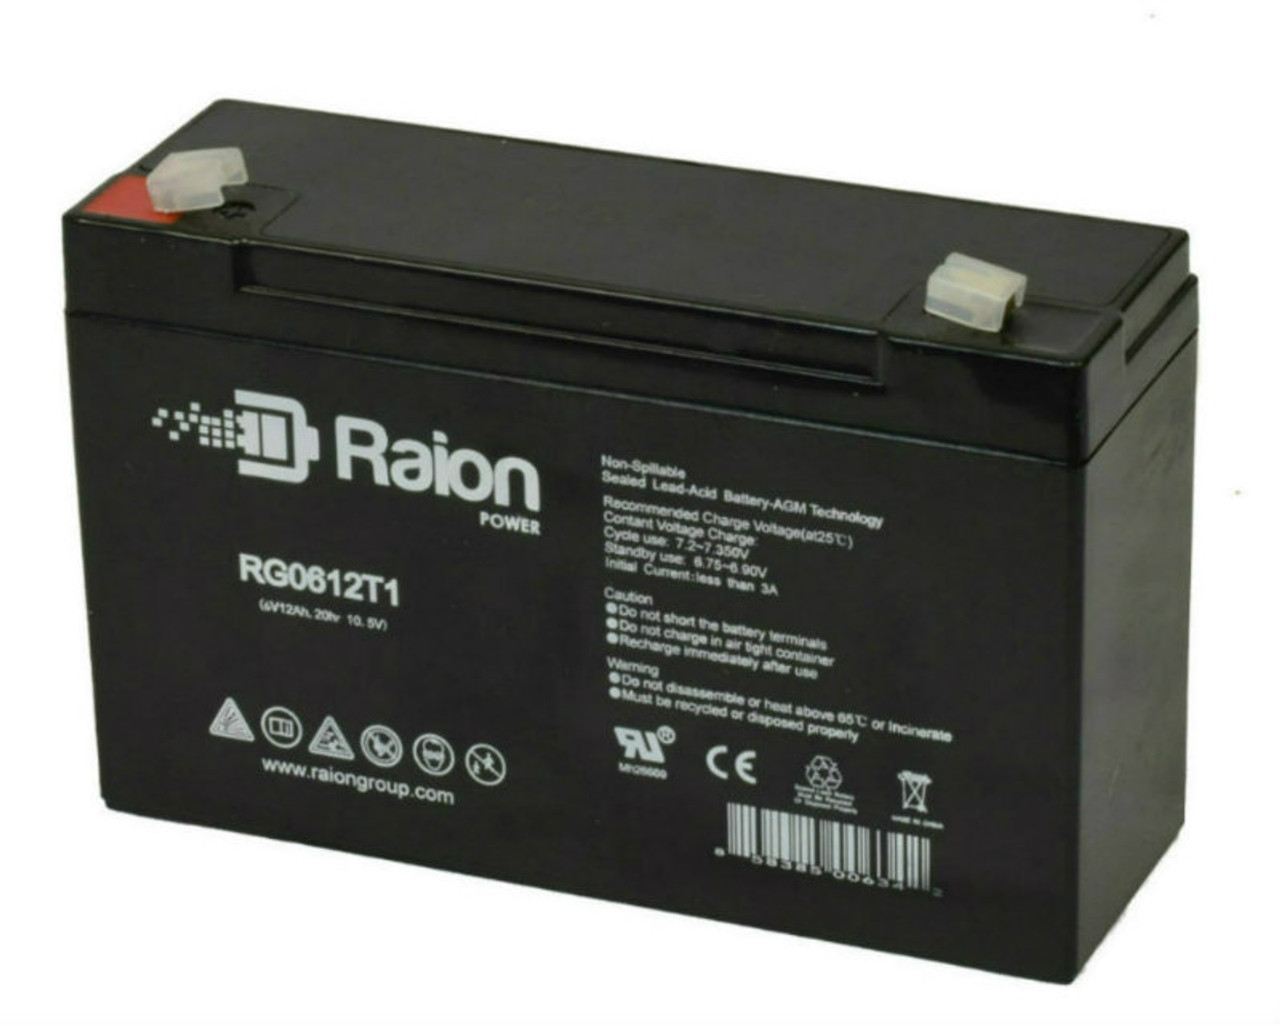 Raion Power RG06120T1 Replacement Emergency Light Battery for Mule GX